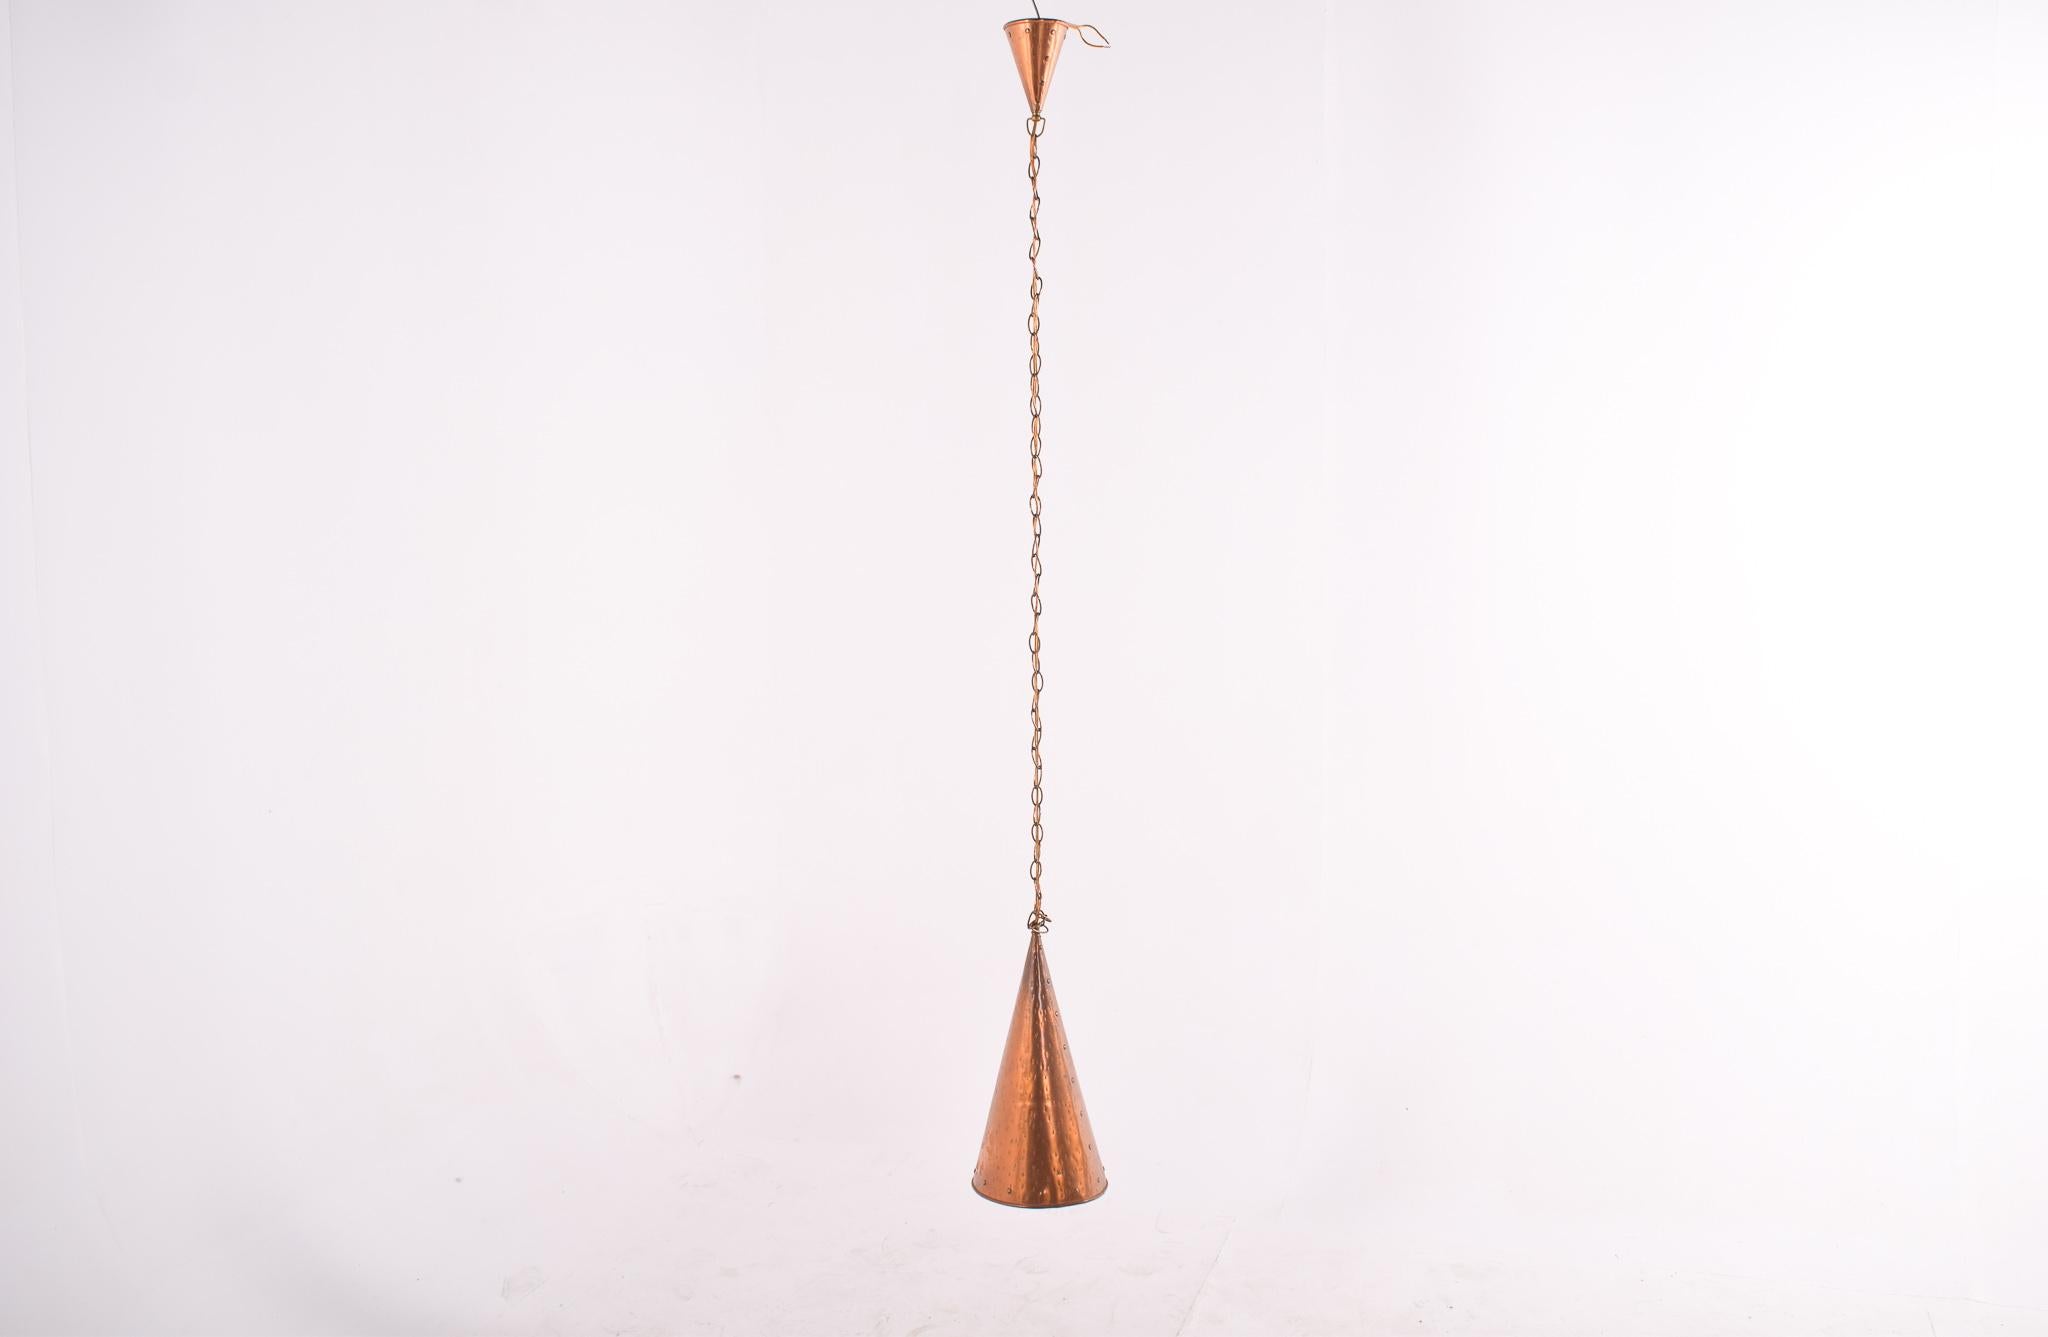 Danish pendant lamp in hand-hammered copper by E.S Horn Aalestrup. Hand-beaten copper gives a hand craft to the pendant lamp. The cable is 